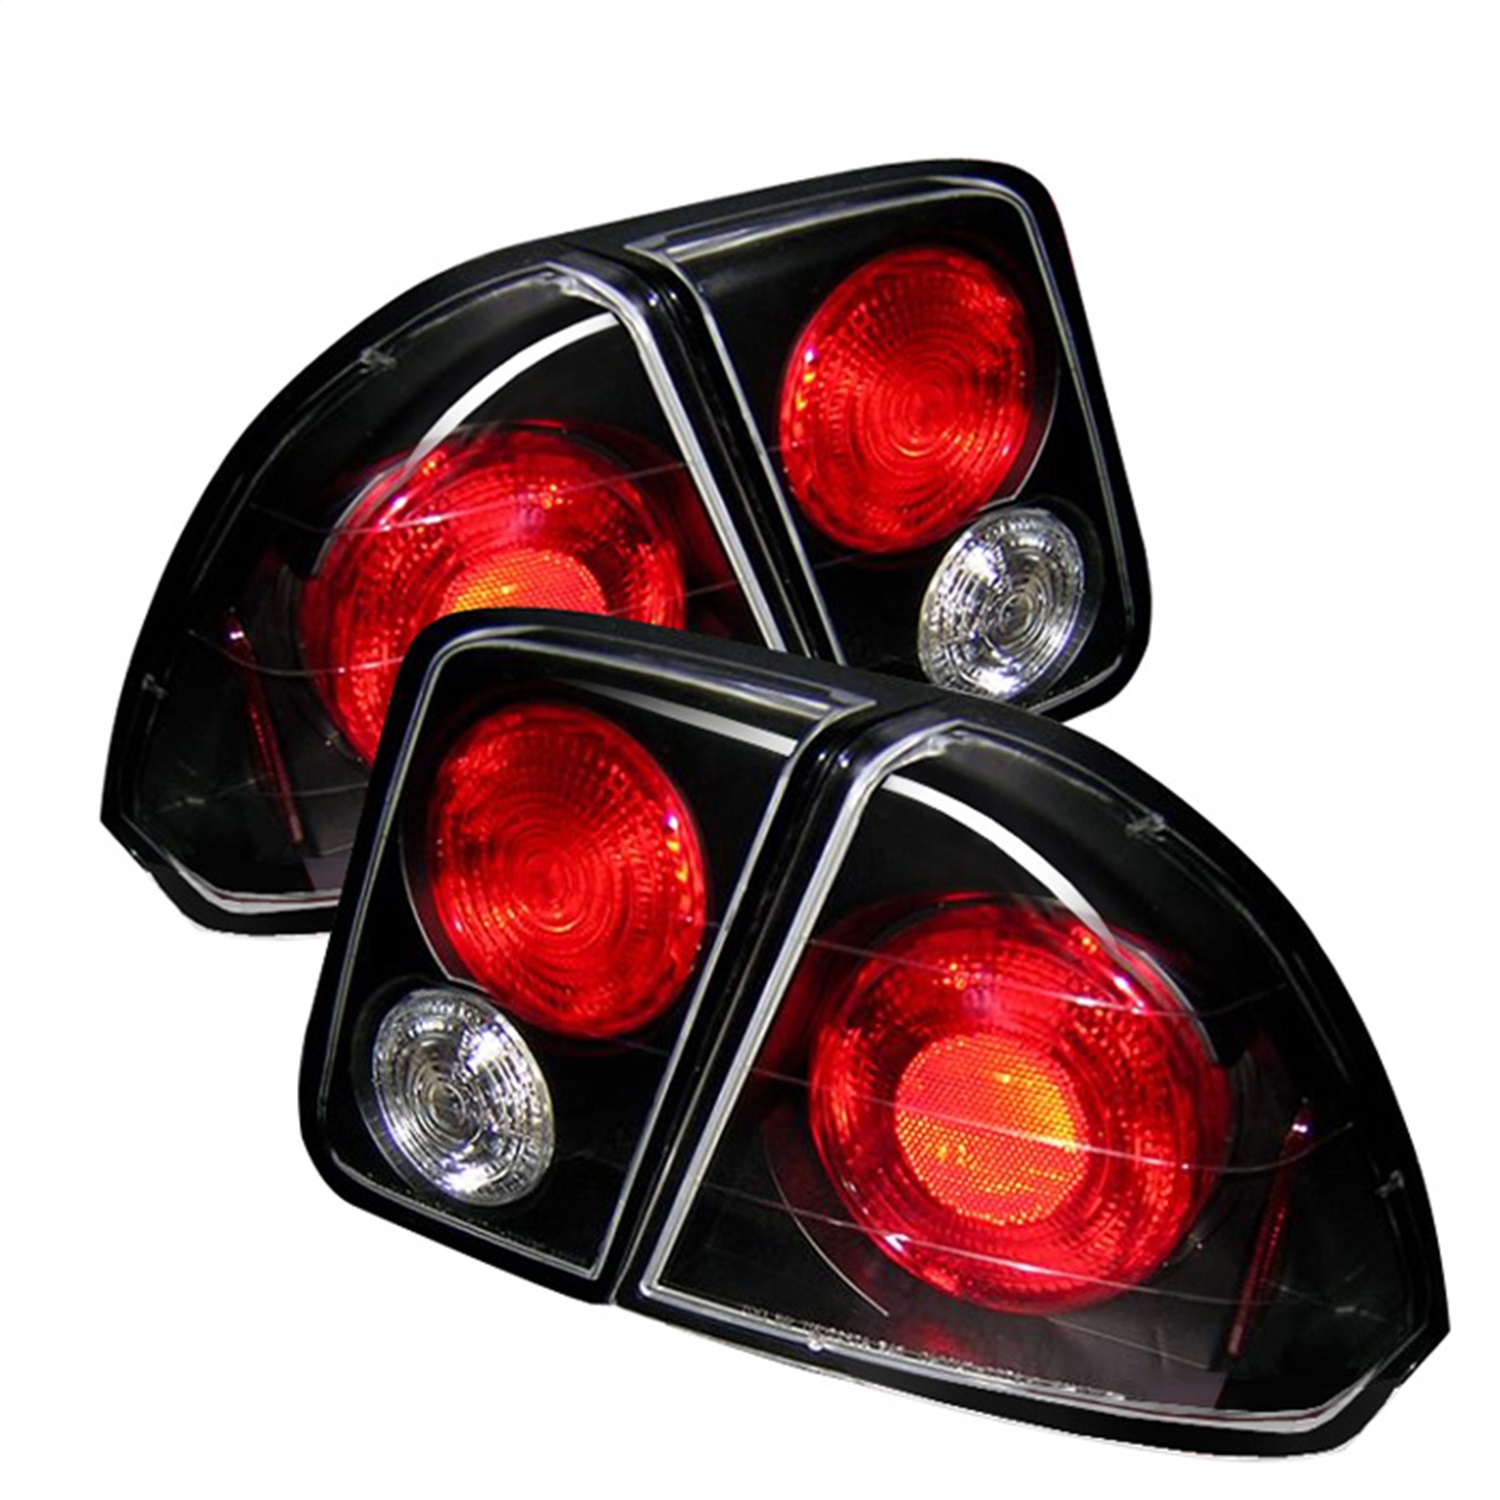 Spyder Auto 5004406 Euro Style Tail Lights Fits 01-05 Civic